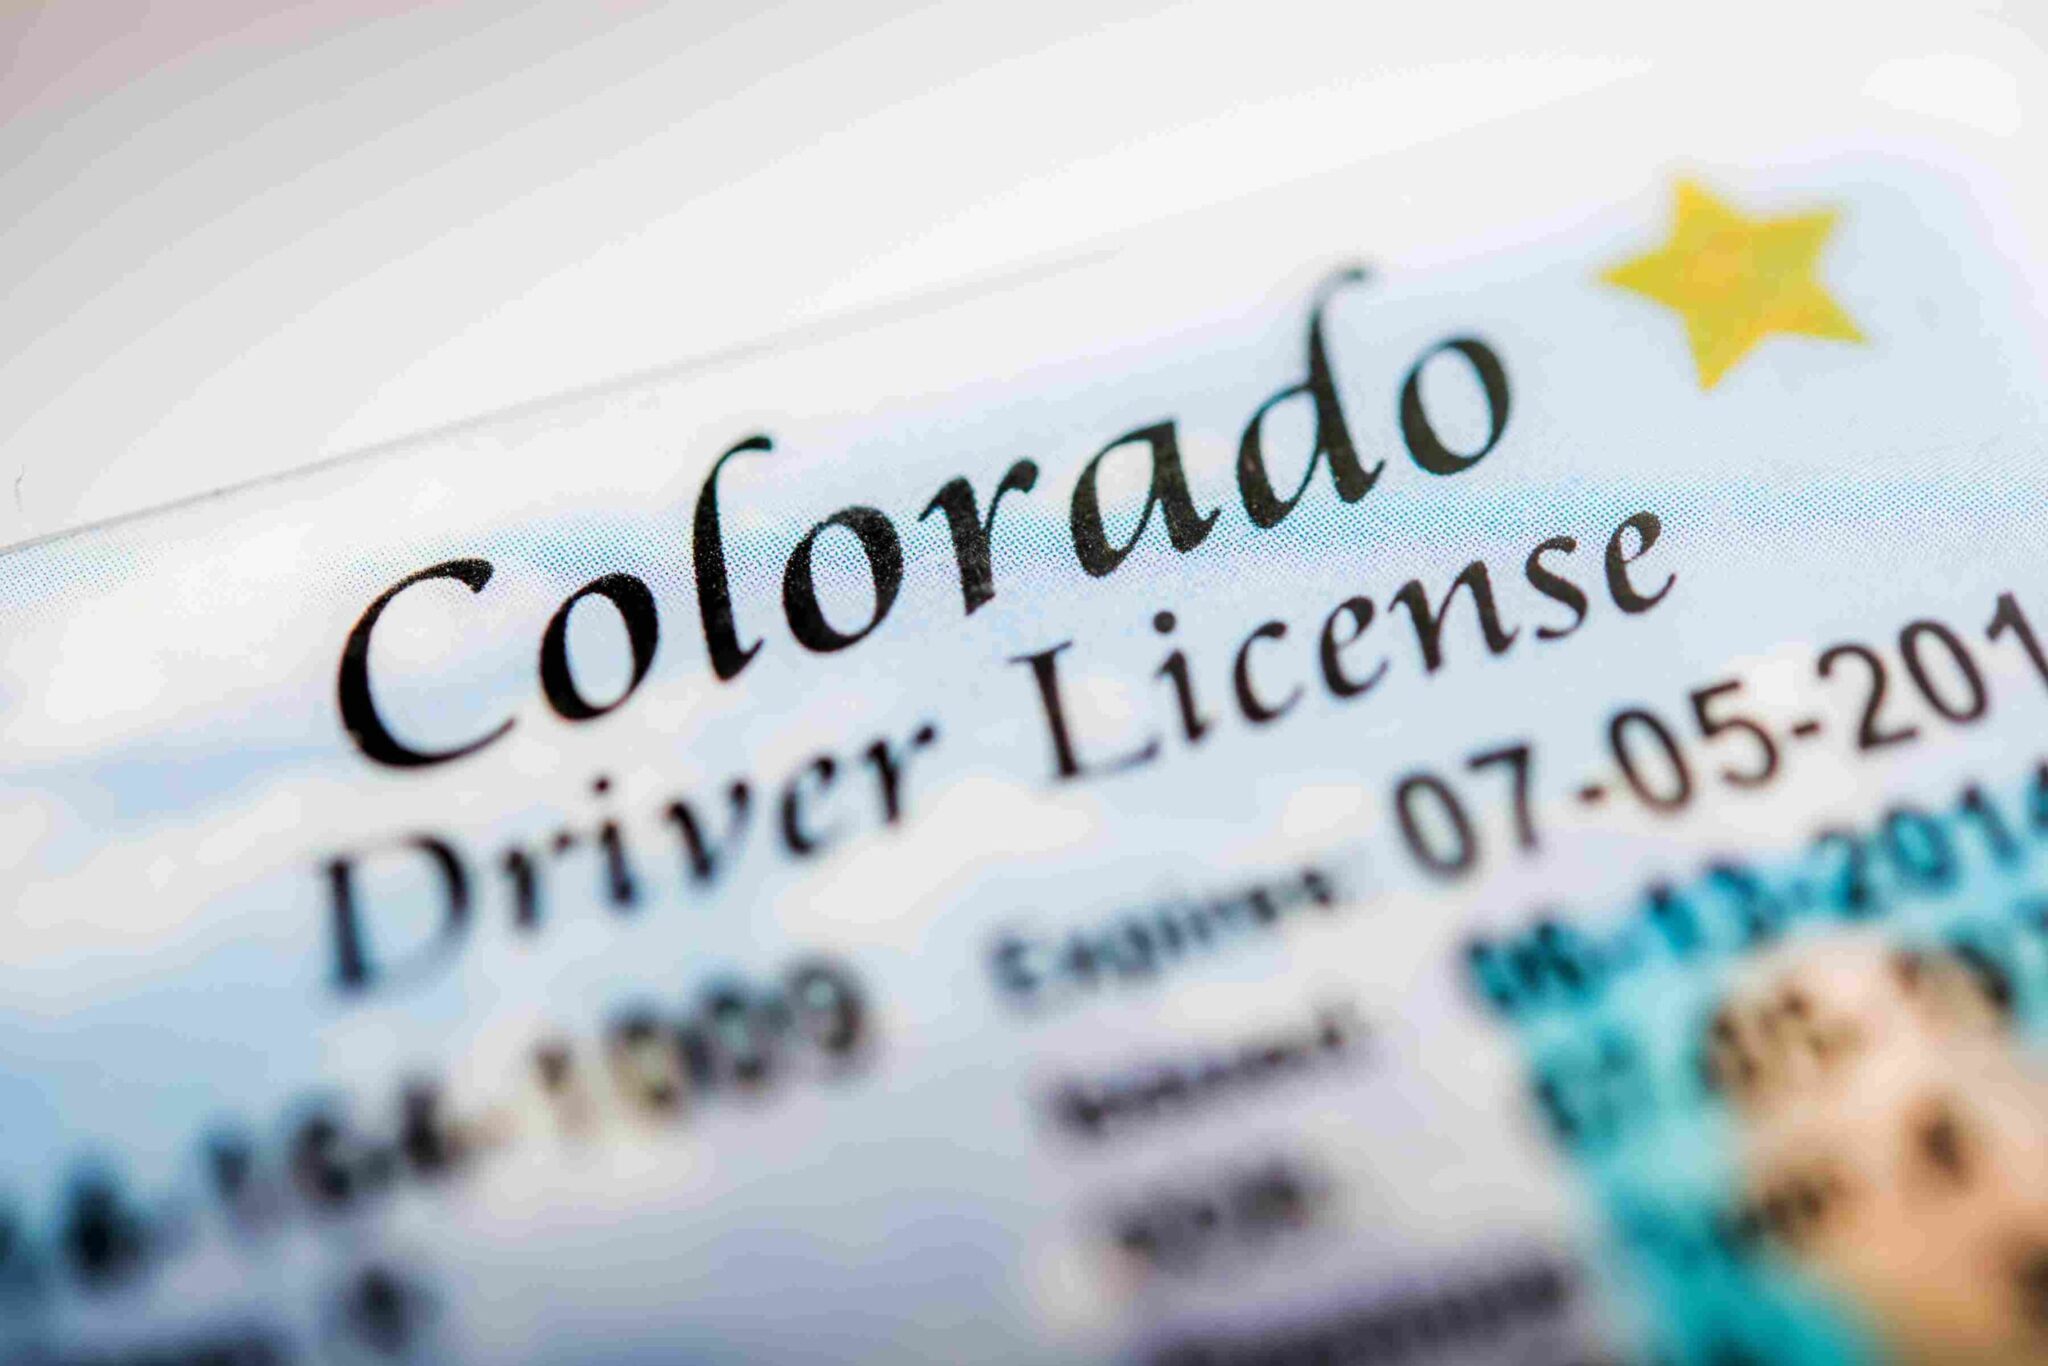 How Long Will I Lose My License in Denver for a DUI?